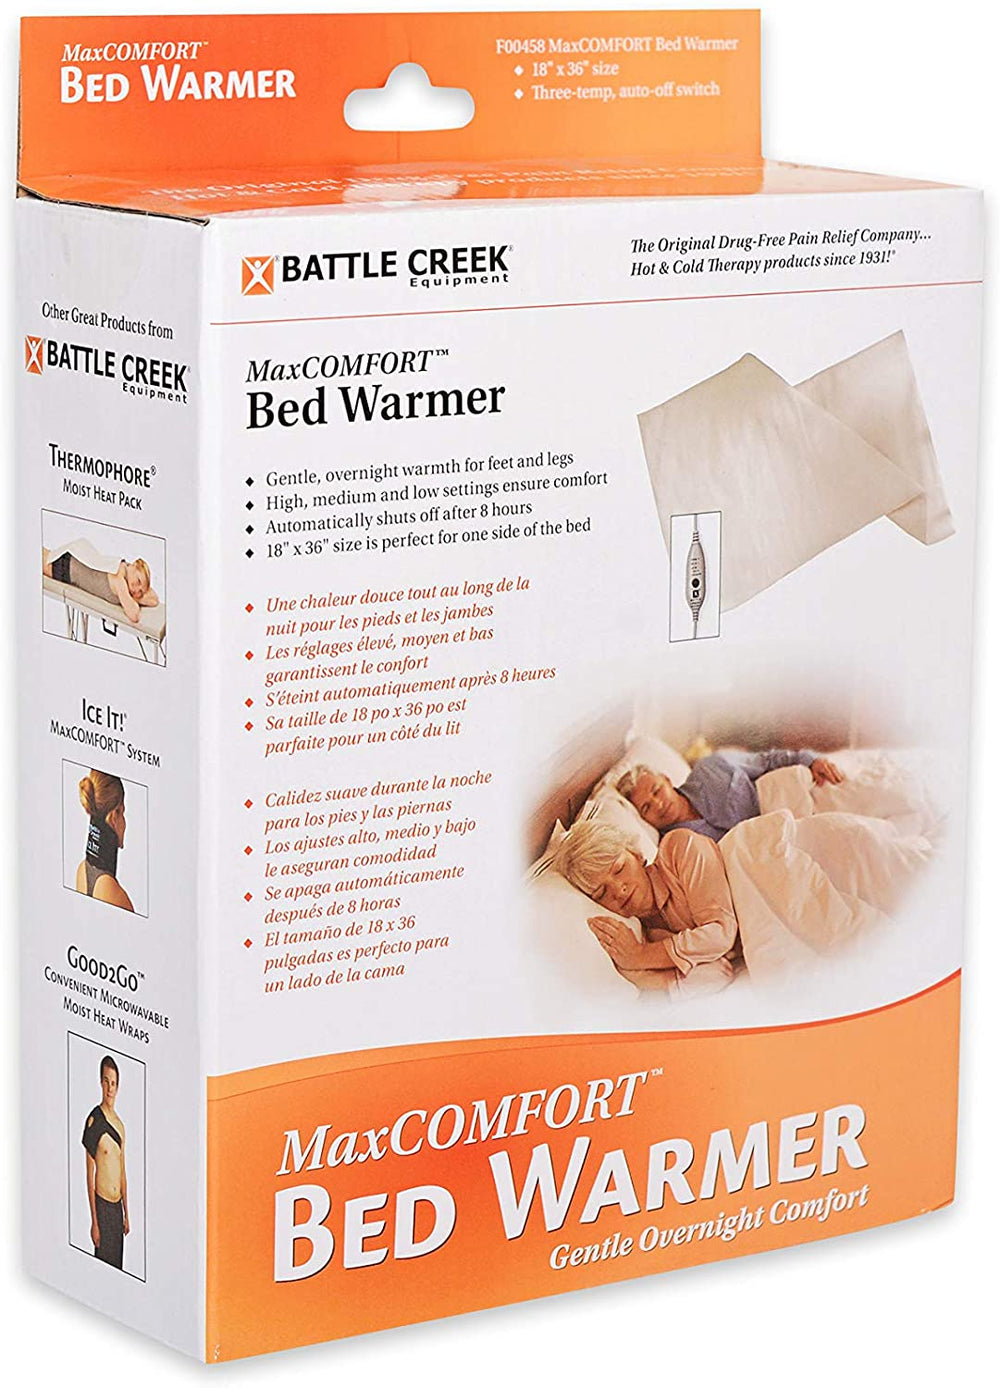 box containing a bed warmer,  battle creek equipment  max comfort bed warmer box shown from the front and side view 